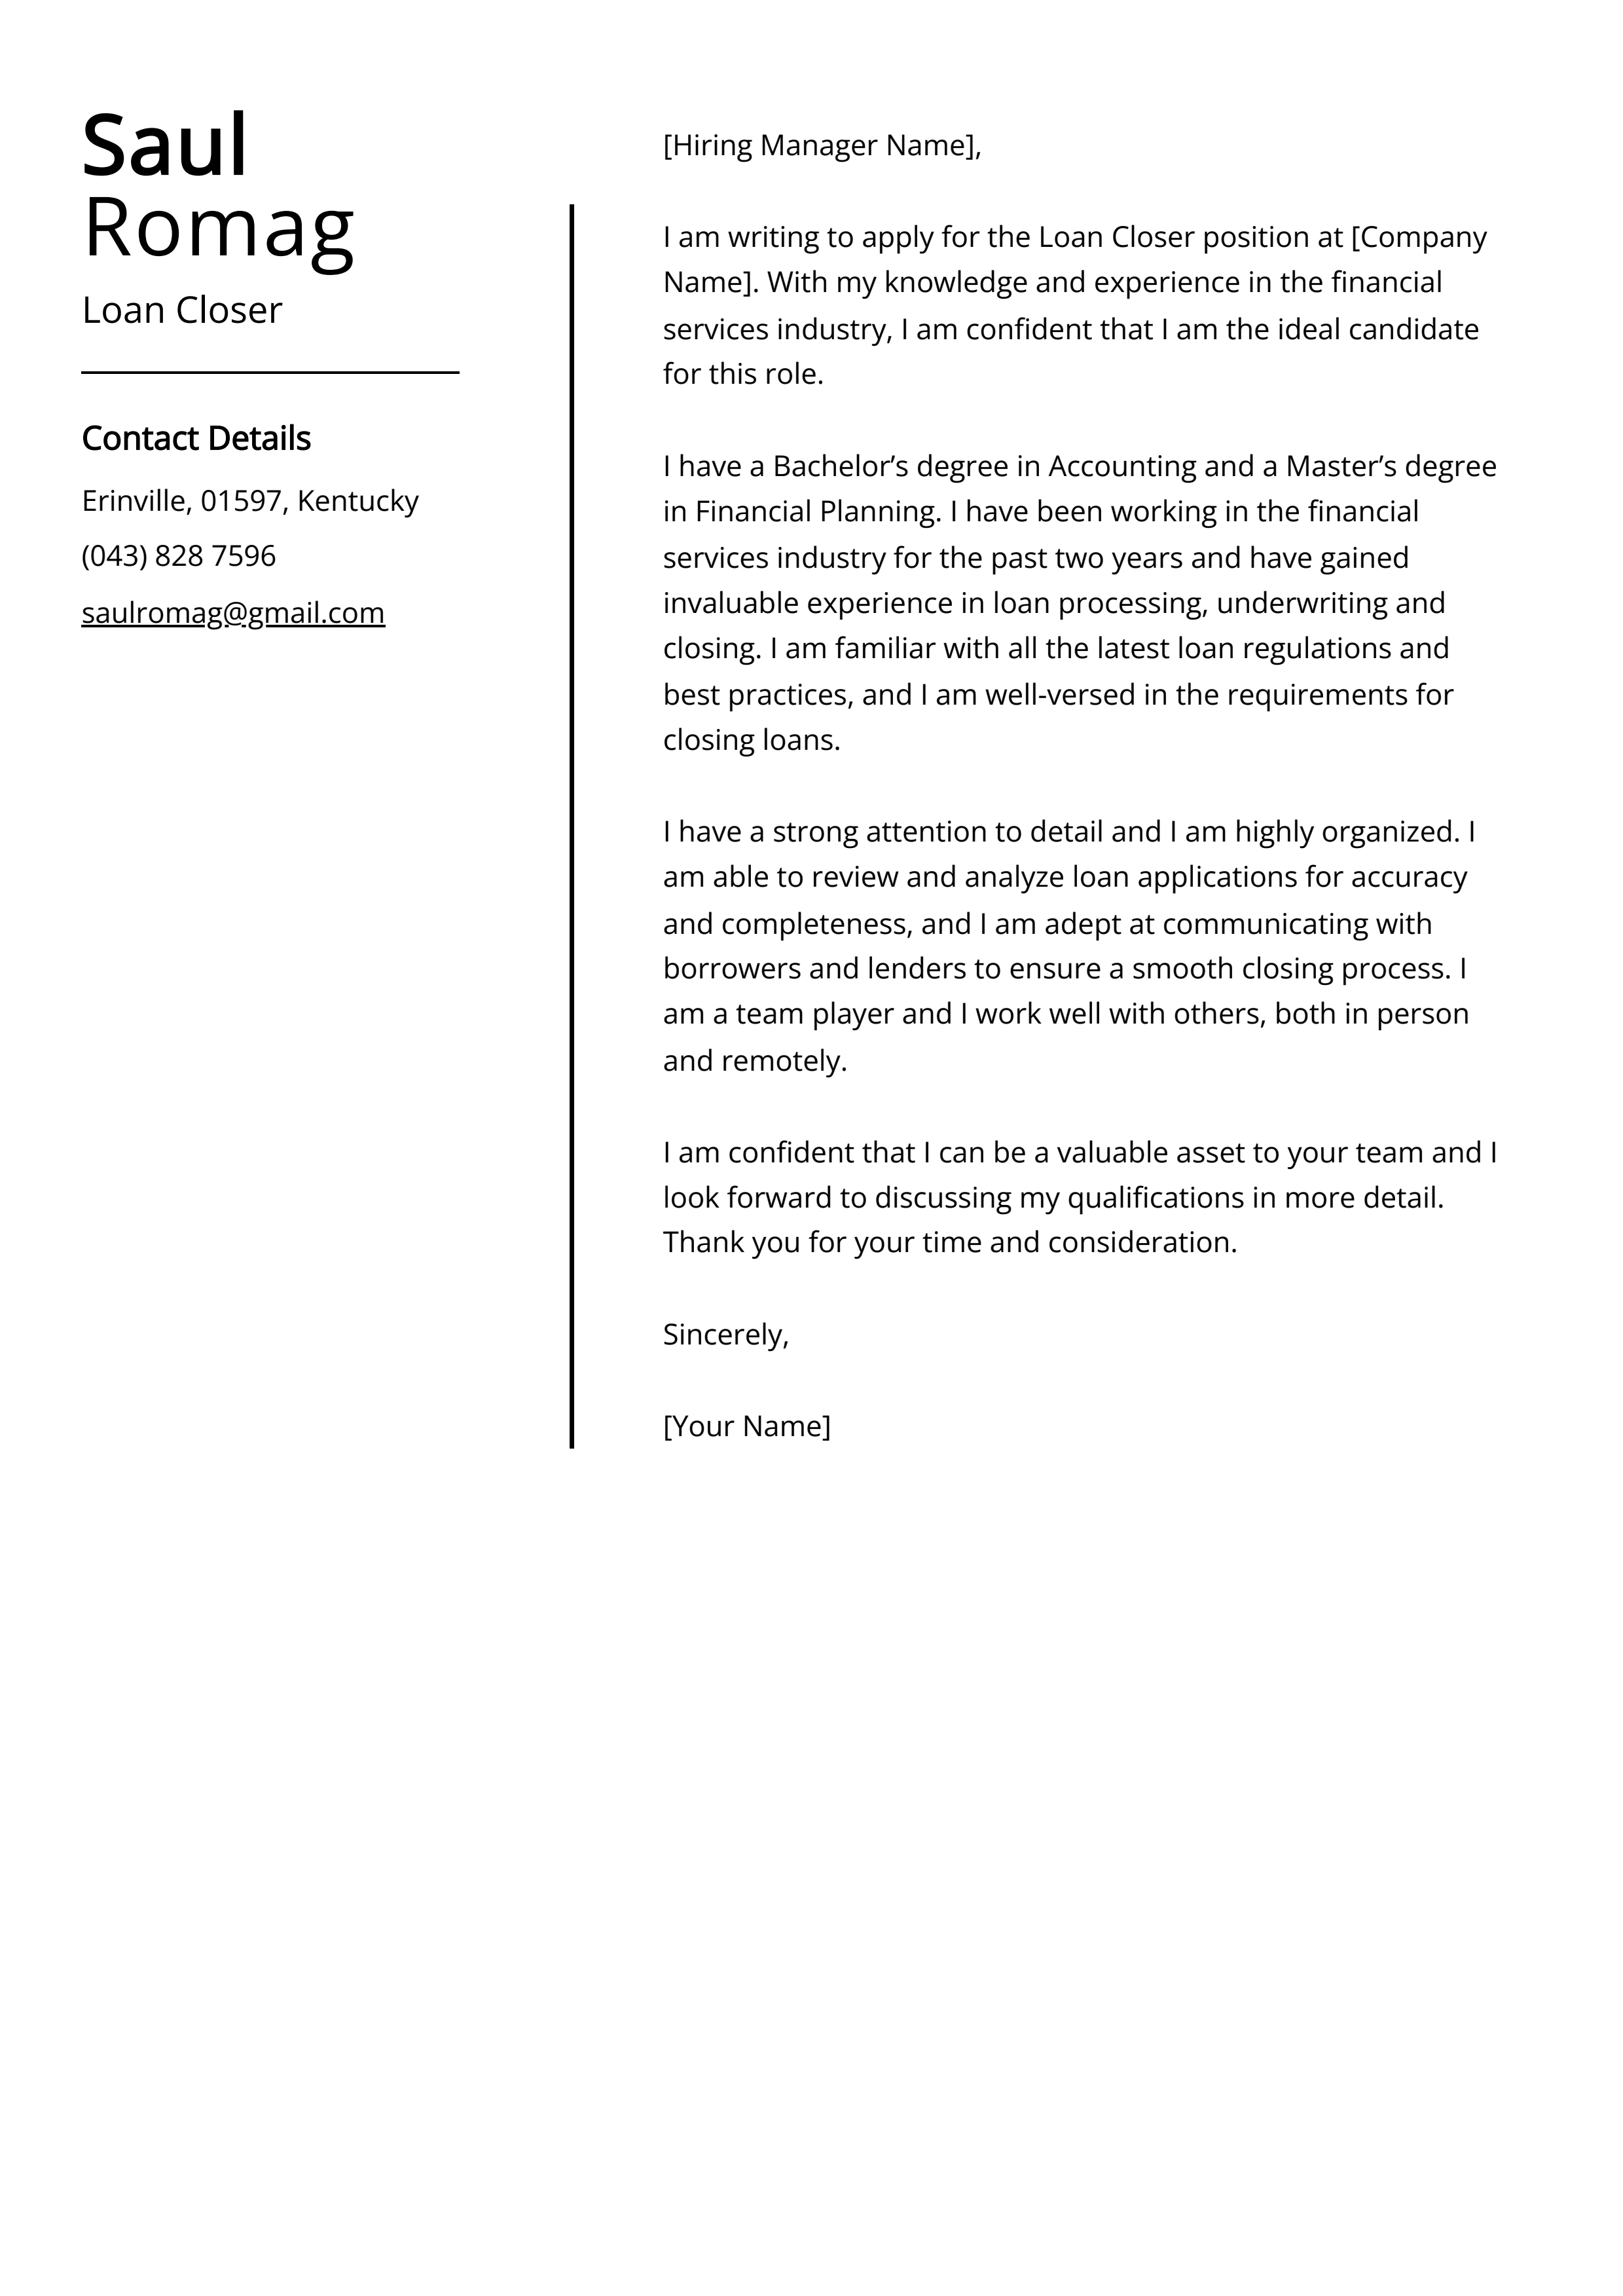 Loan Closer Cover Letter Example